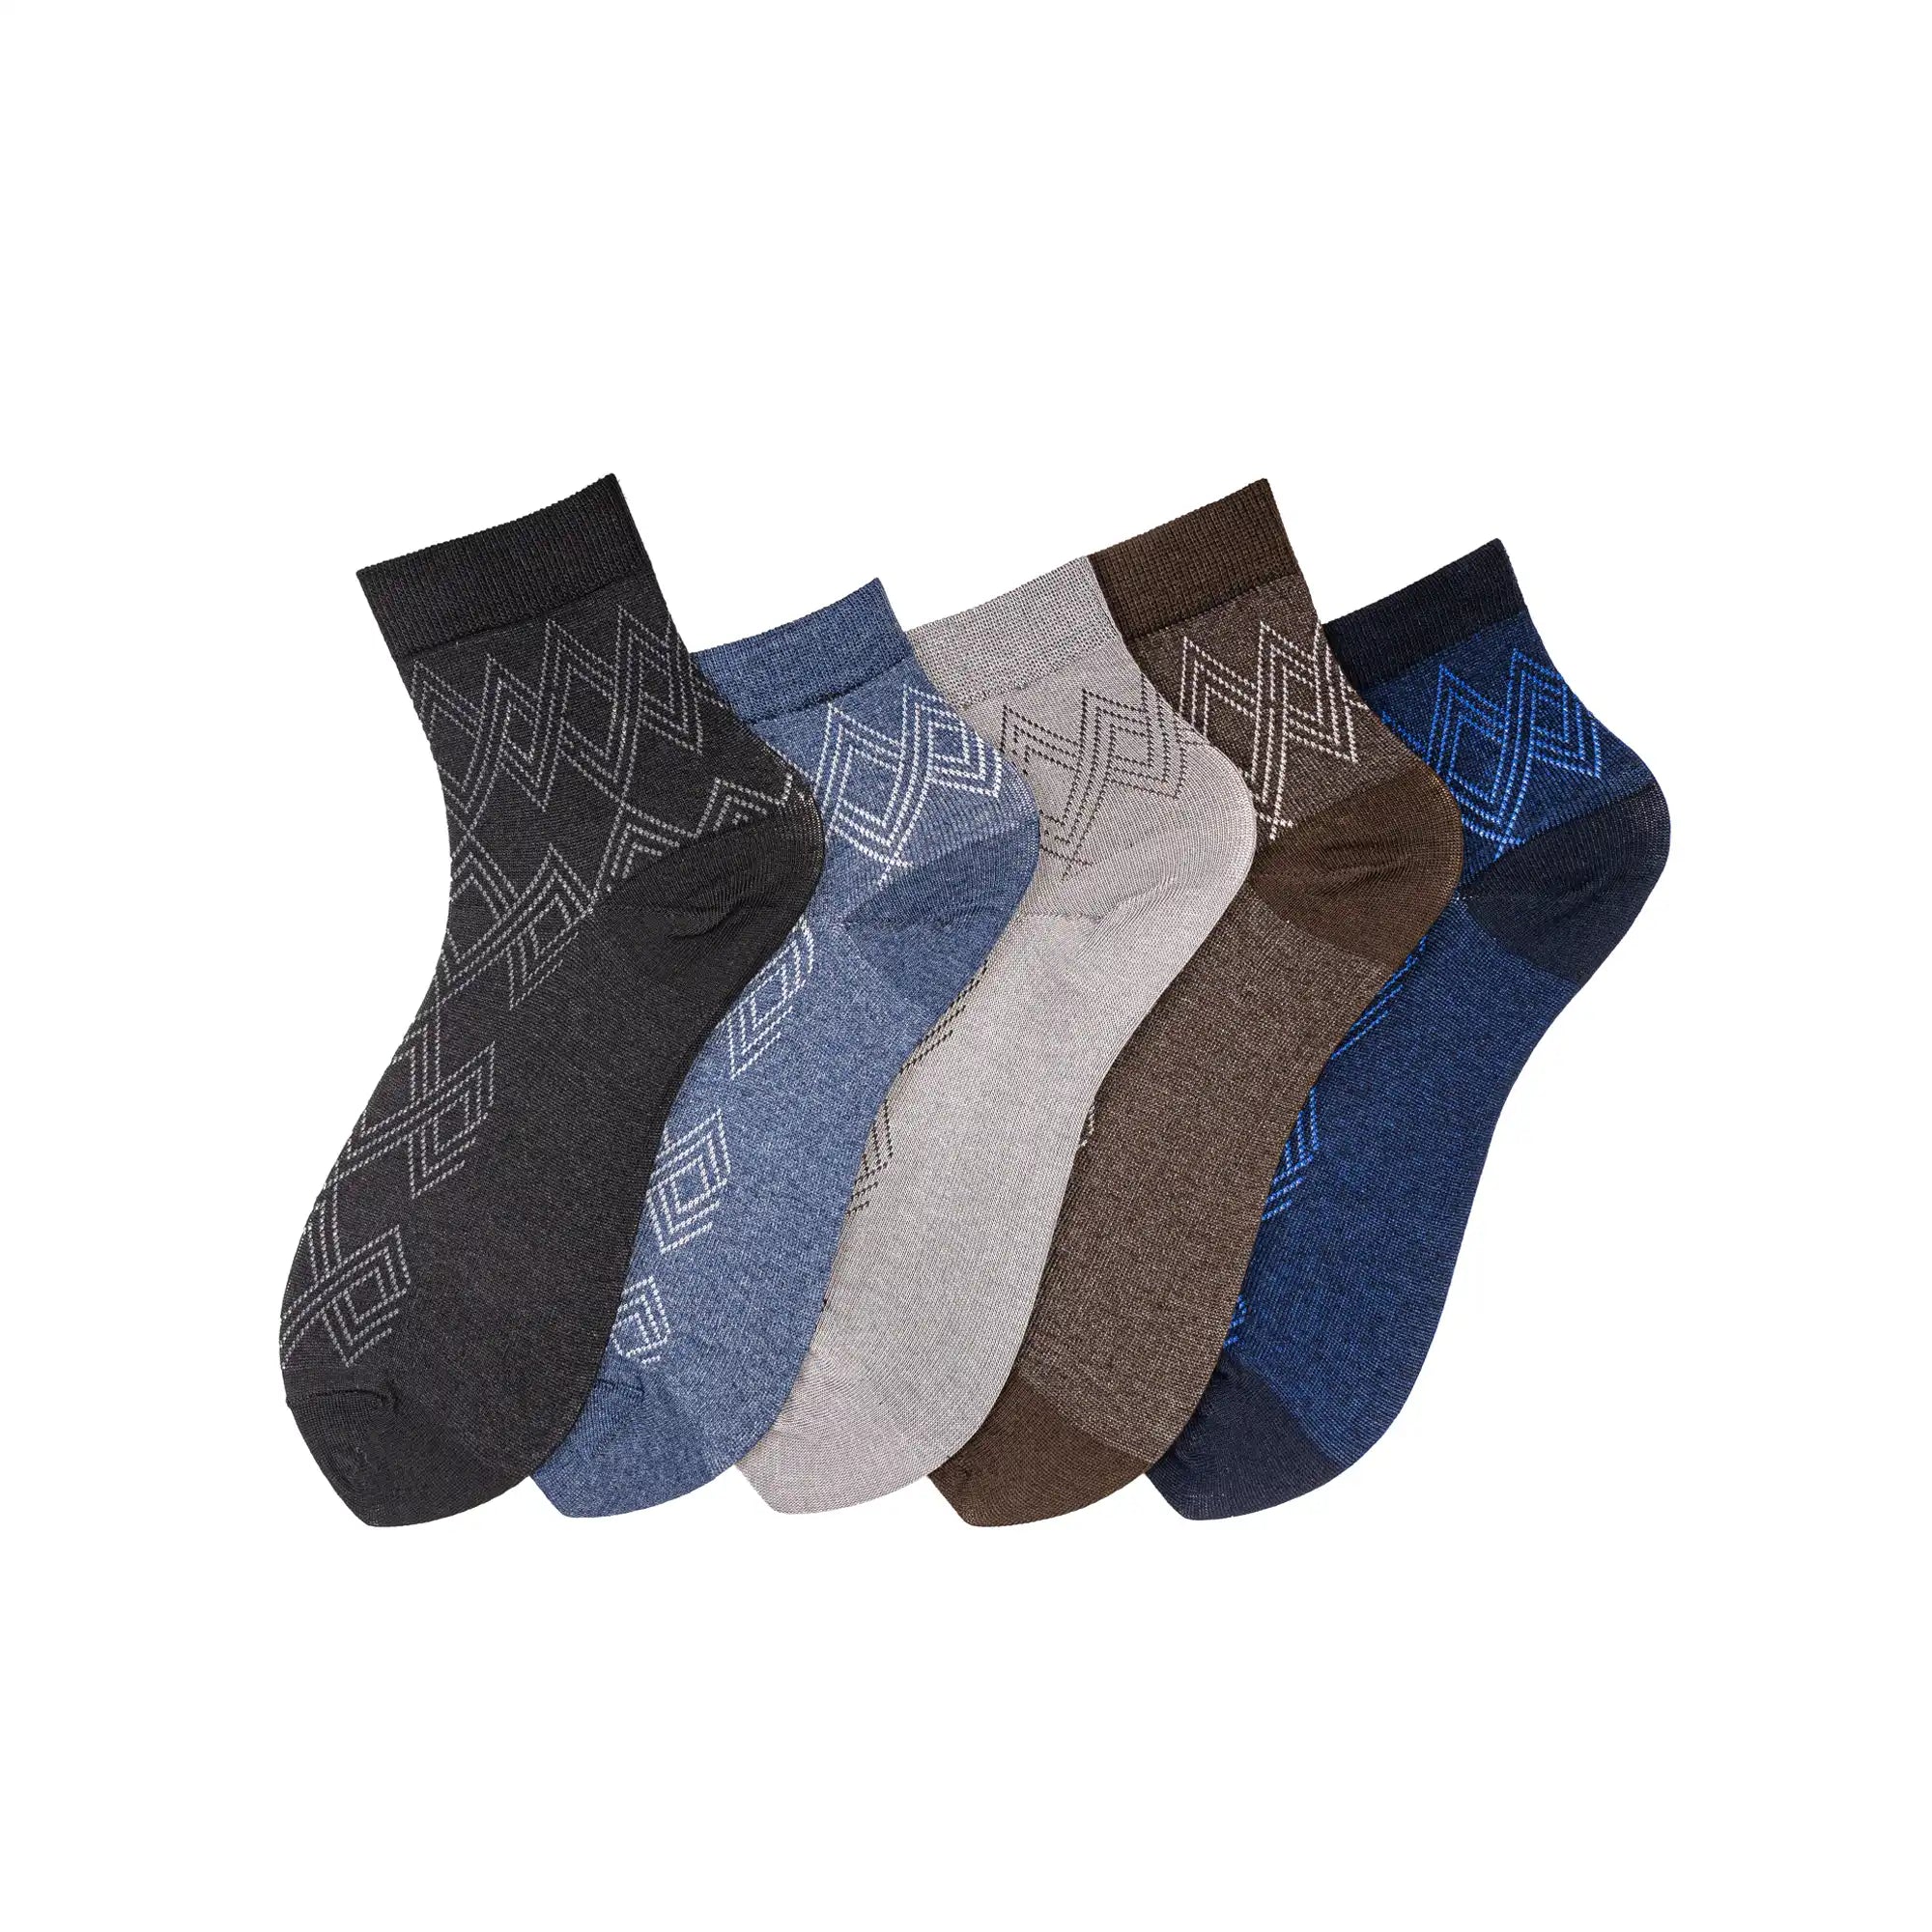 Young Wings Men's Multi Colour Cotton Fabric Solid Ankle Length Socks - Pack of 5, Style no. 2304-M1